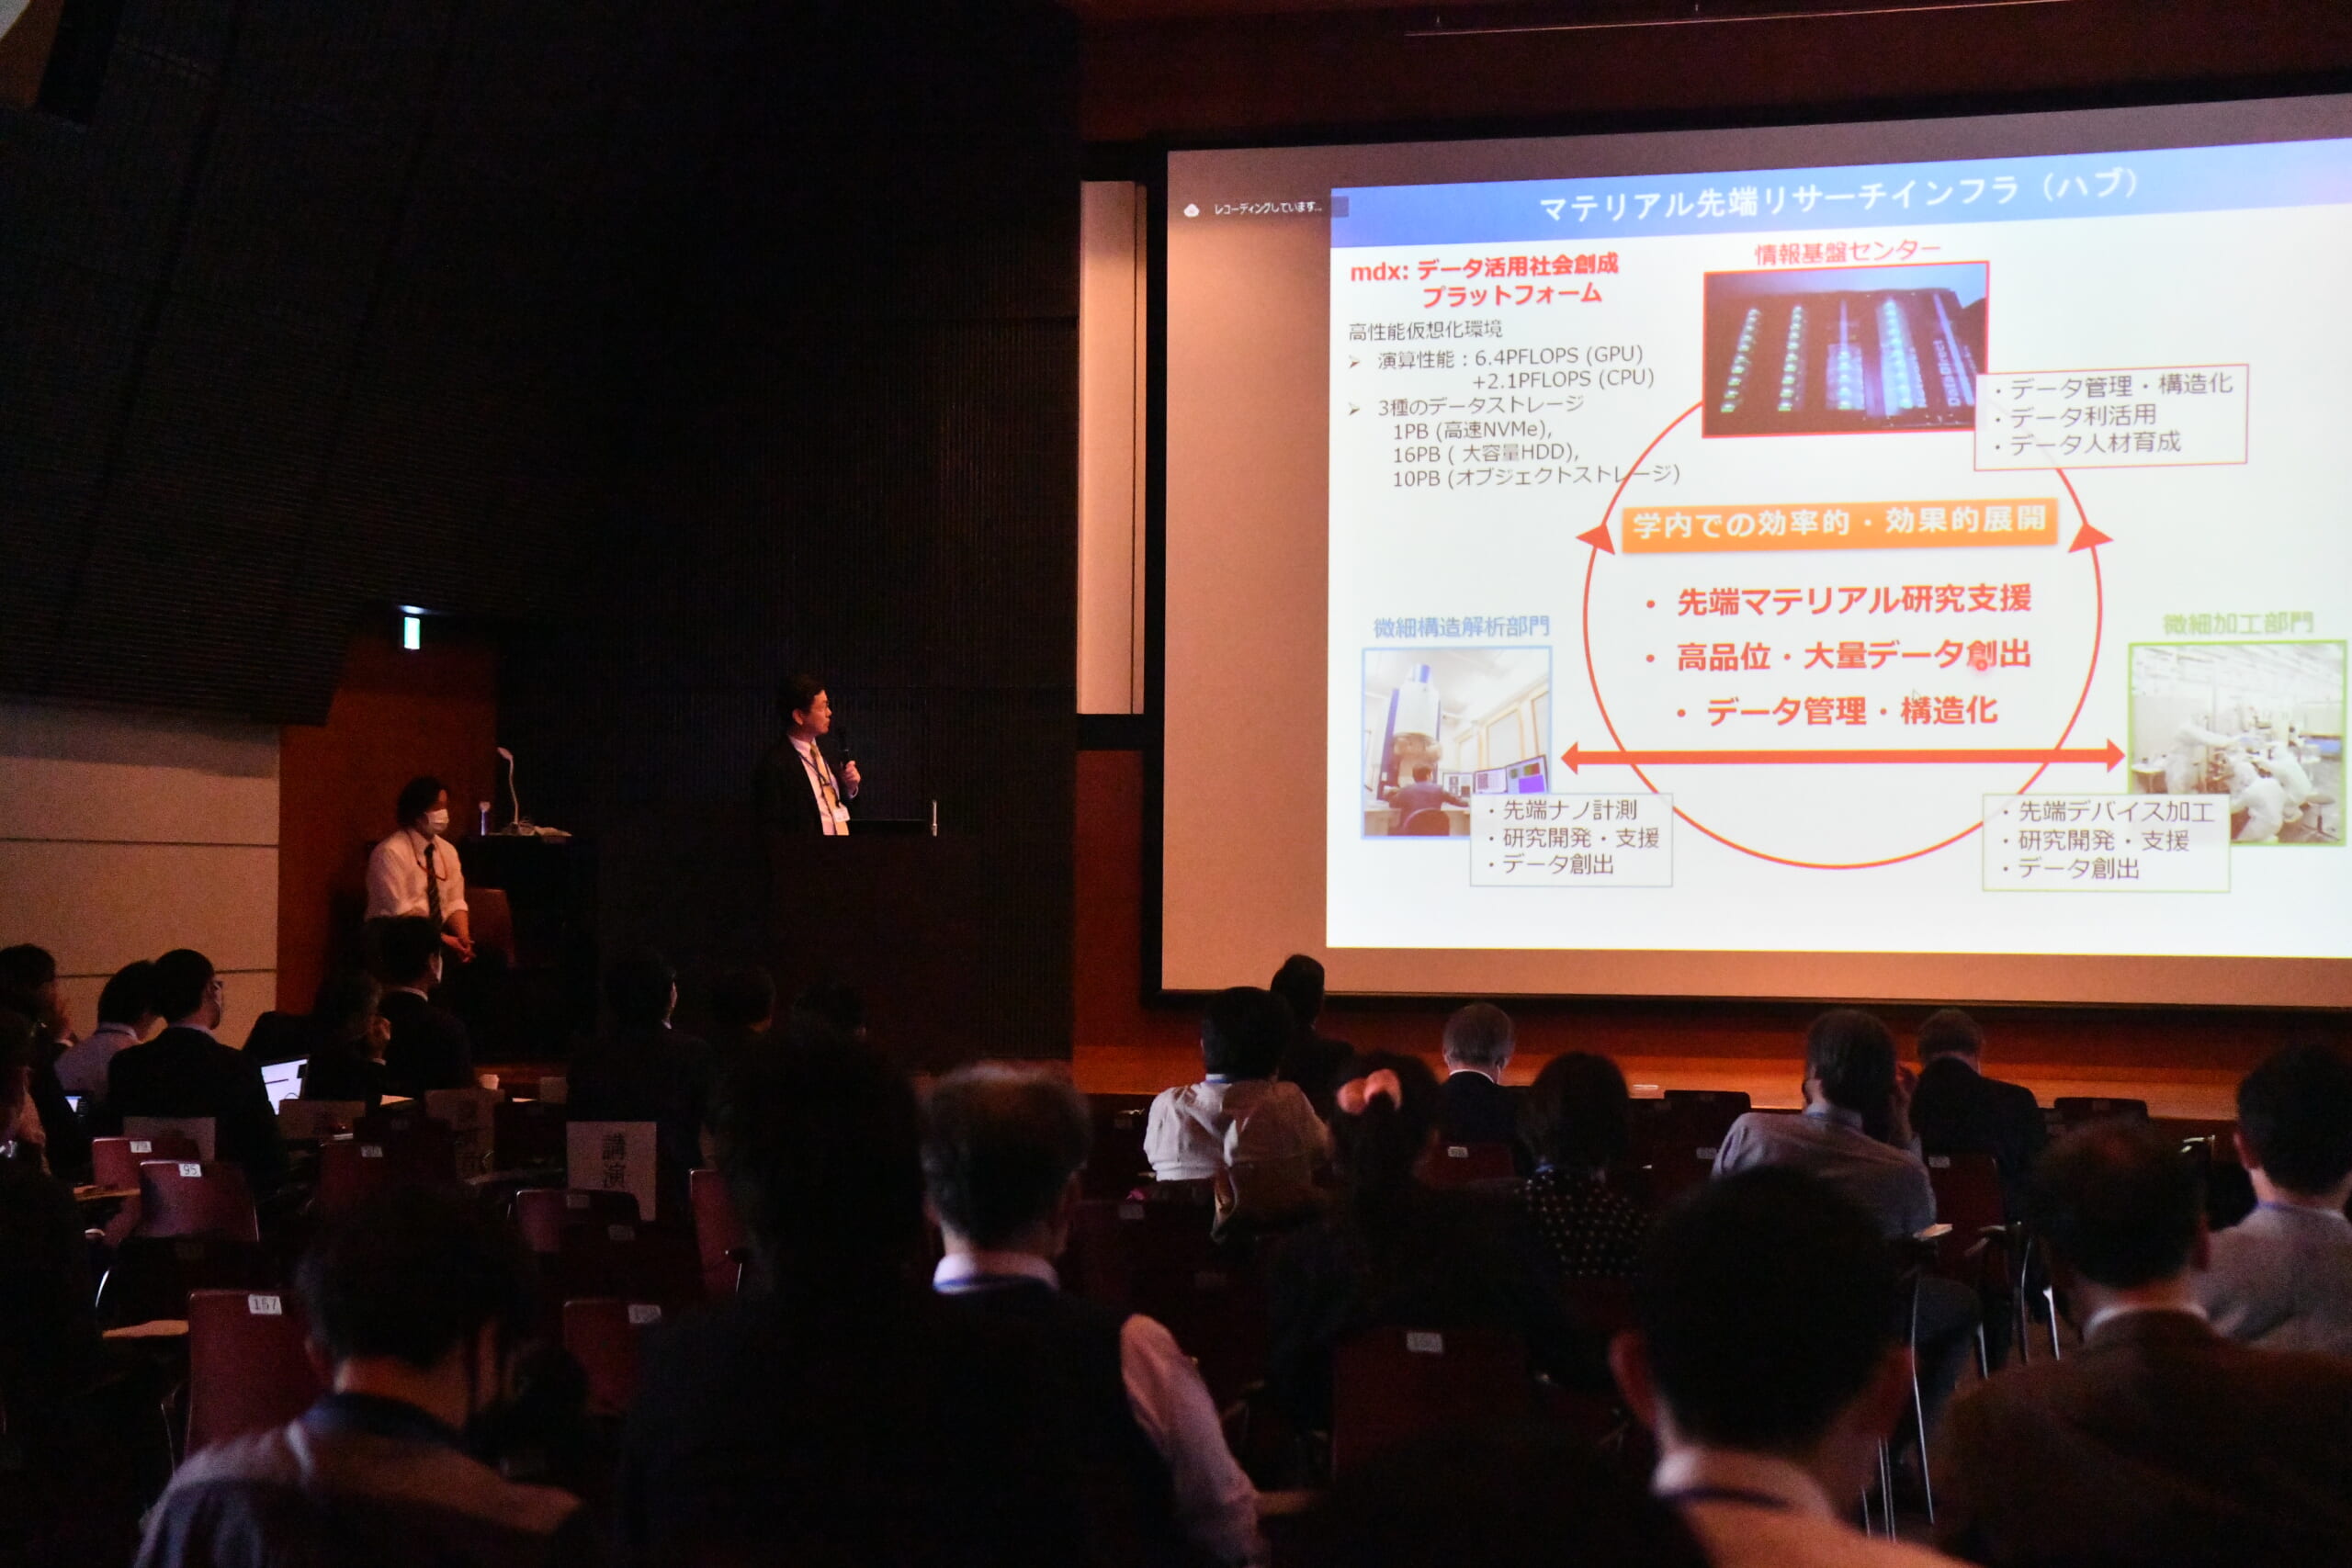 Holding of "Materials Symposium for Innovative Energy Conversion"